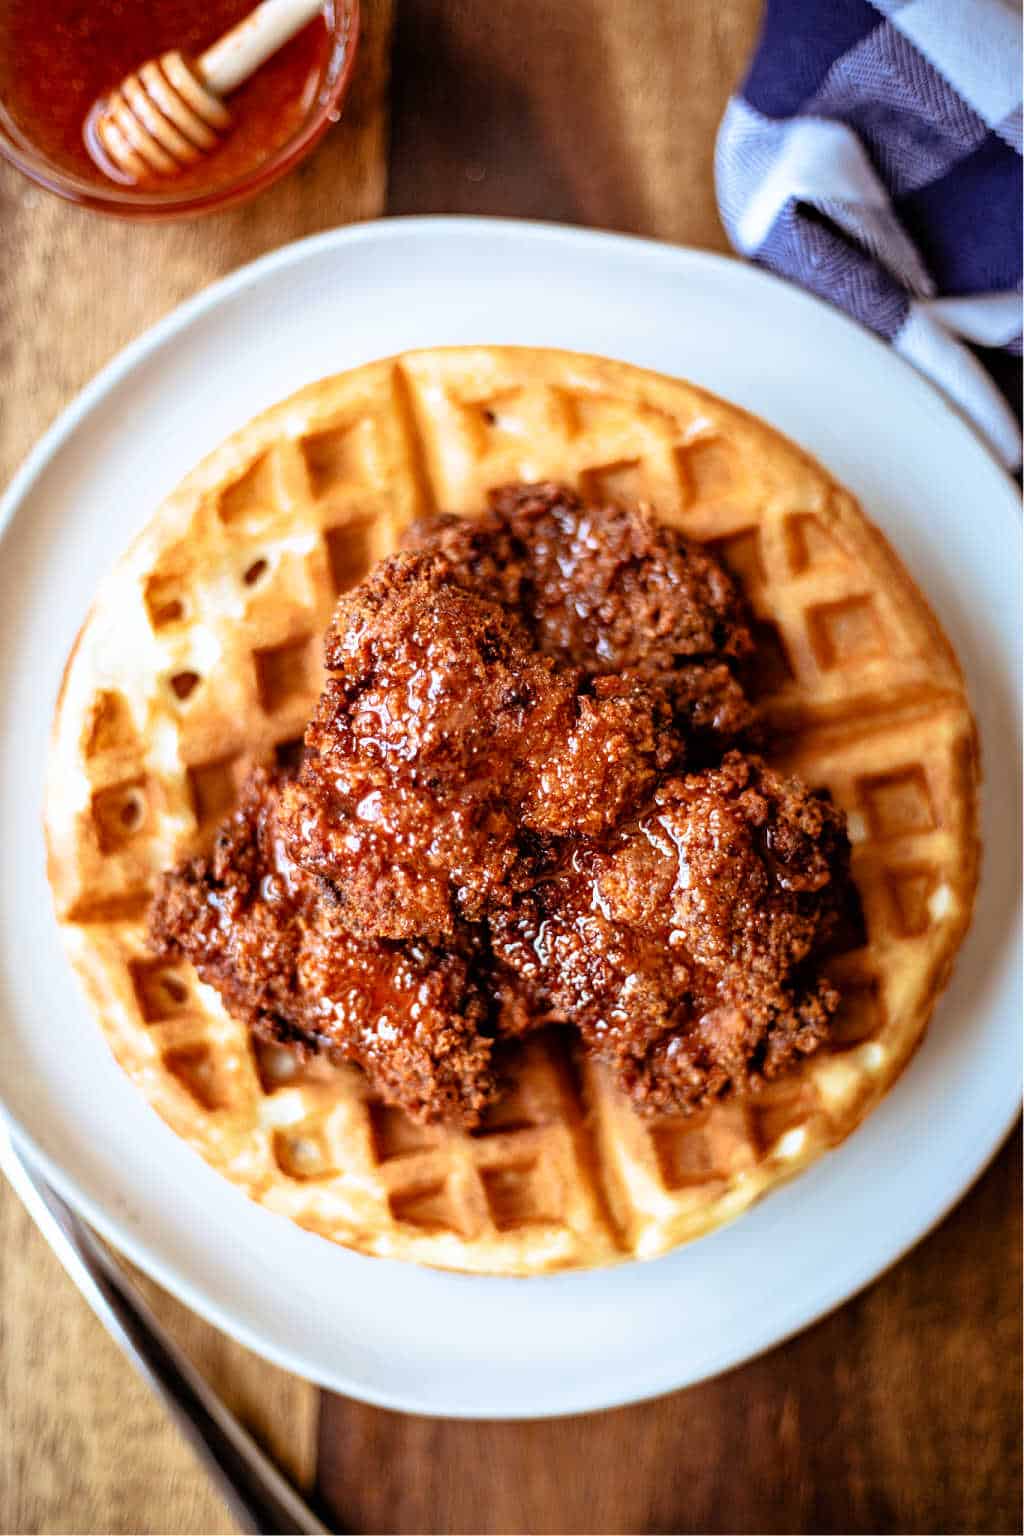 A close up of Chicken and Waffle on a plate